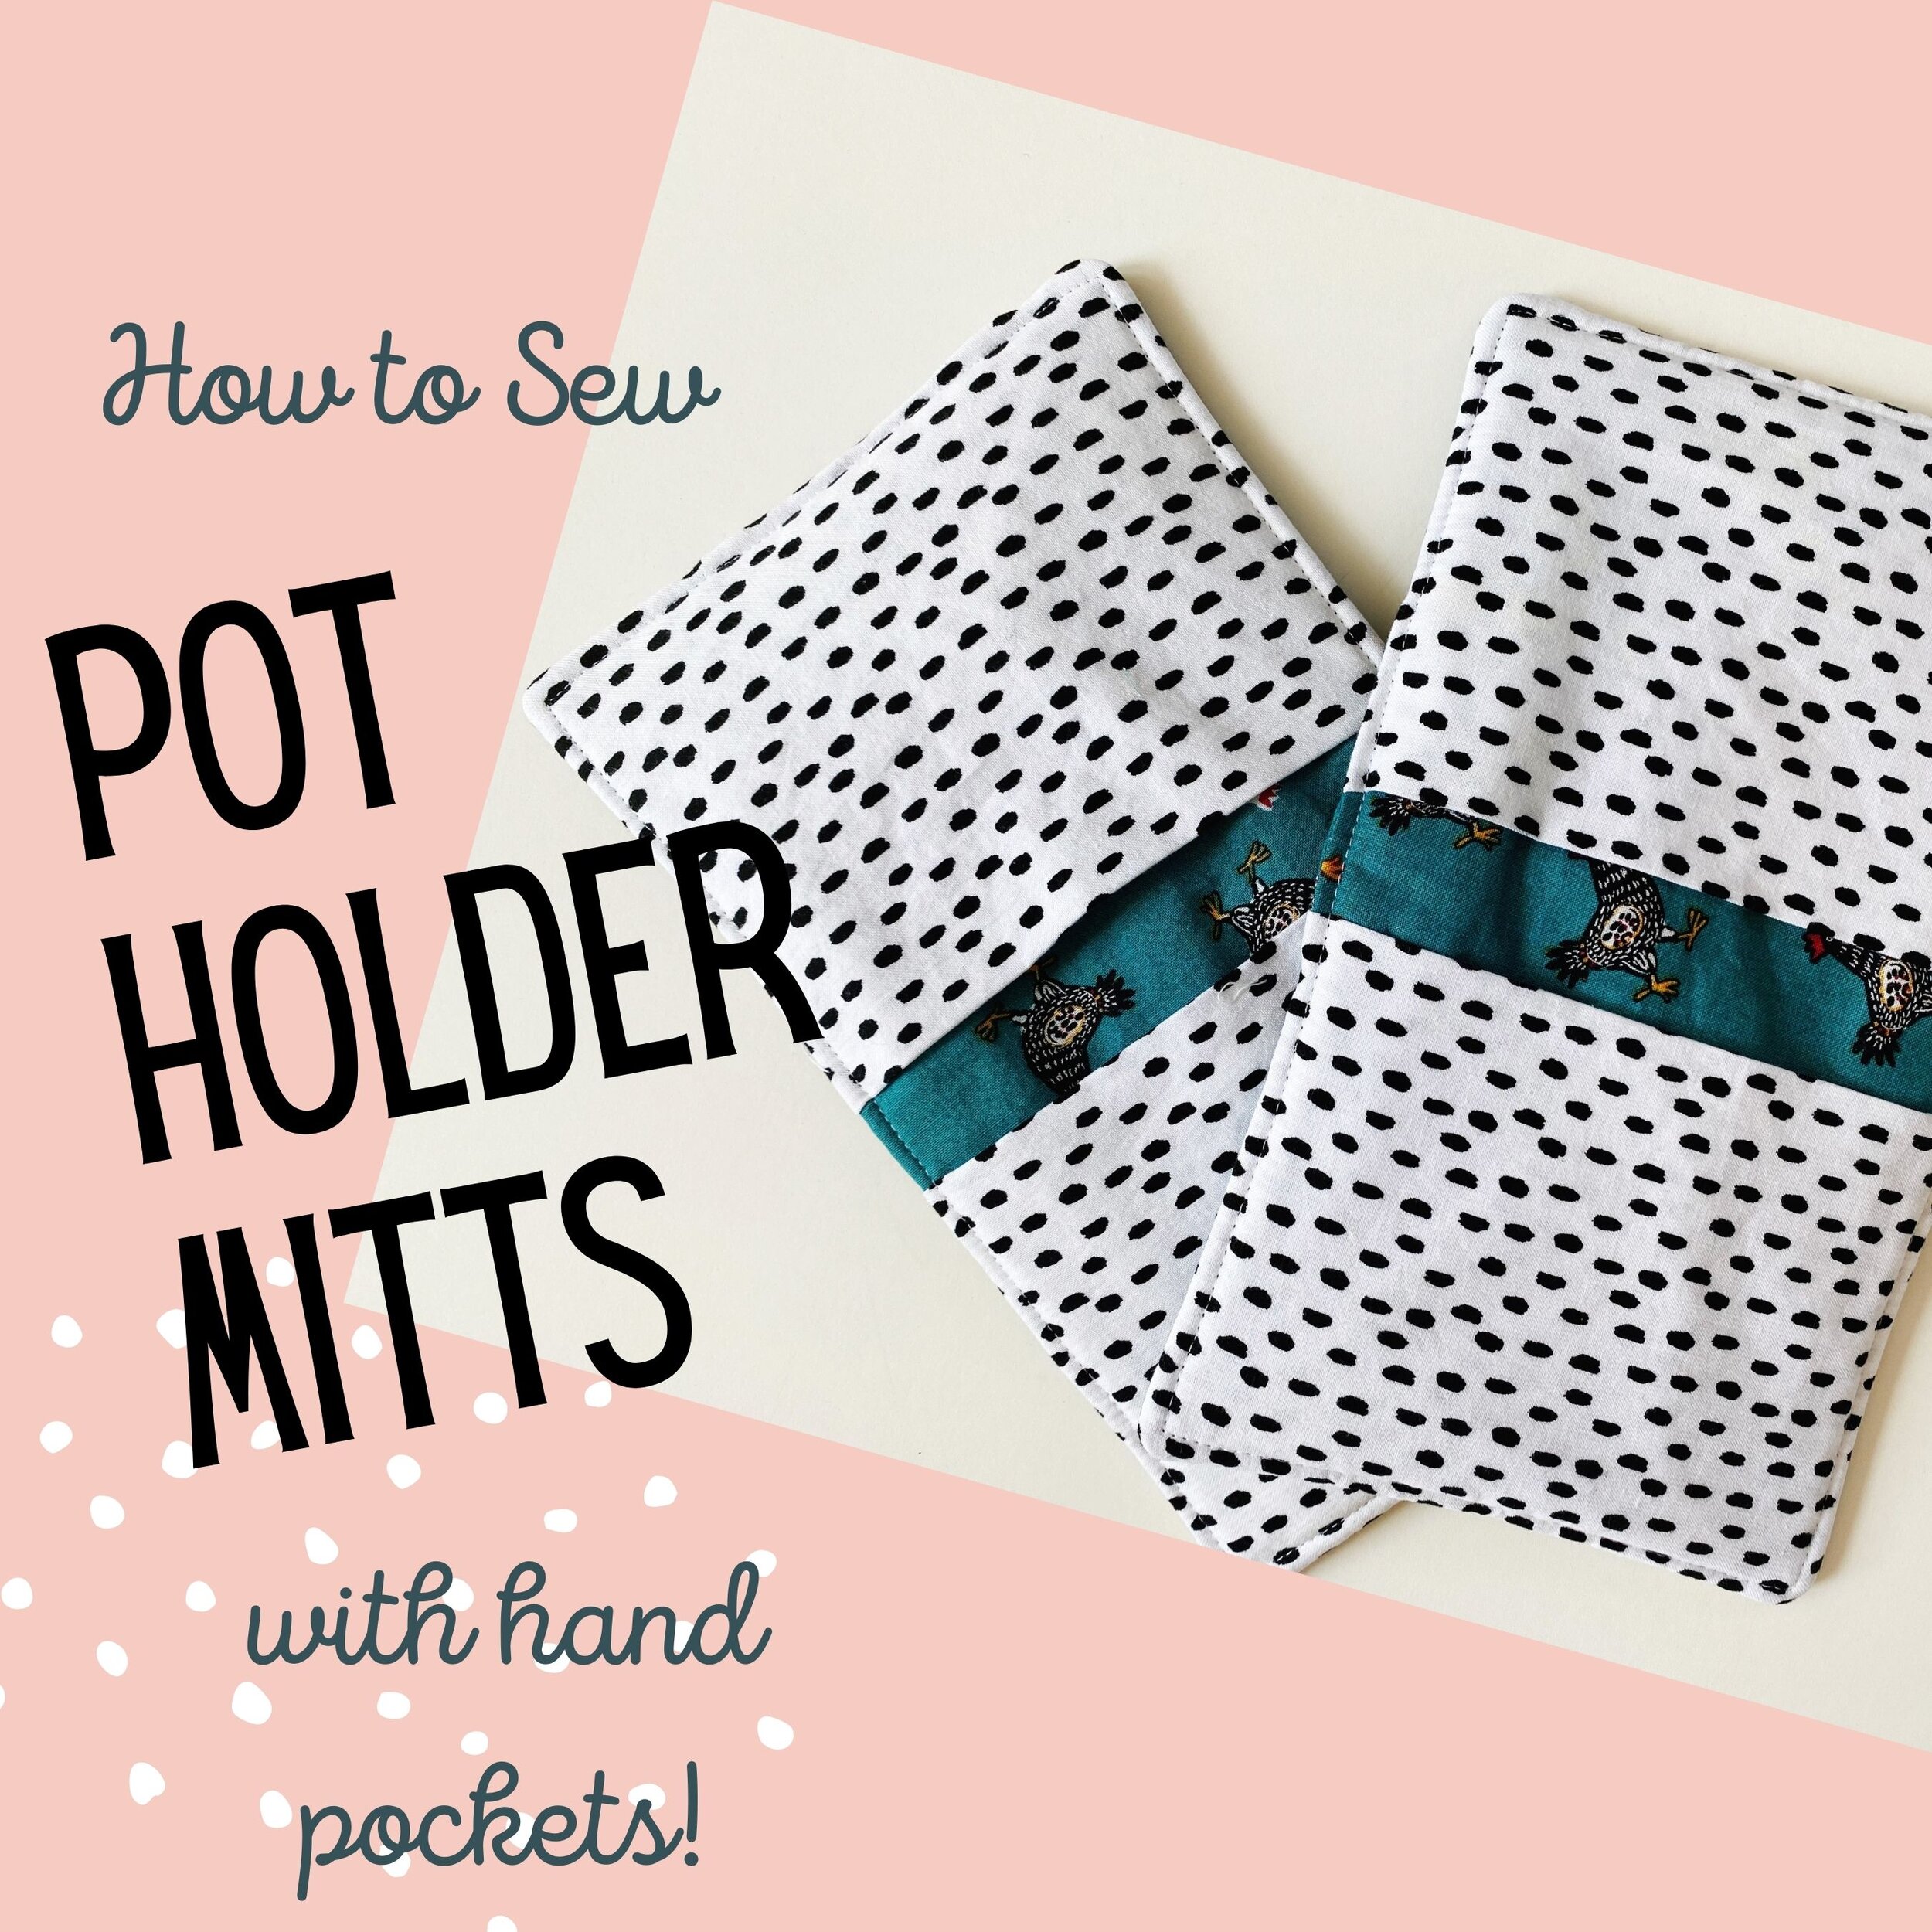 Last Minute Gifts to Sew for Mother's Day - Quick, Easy Sewing